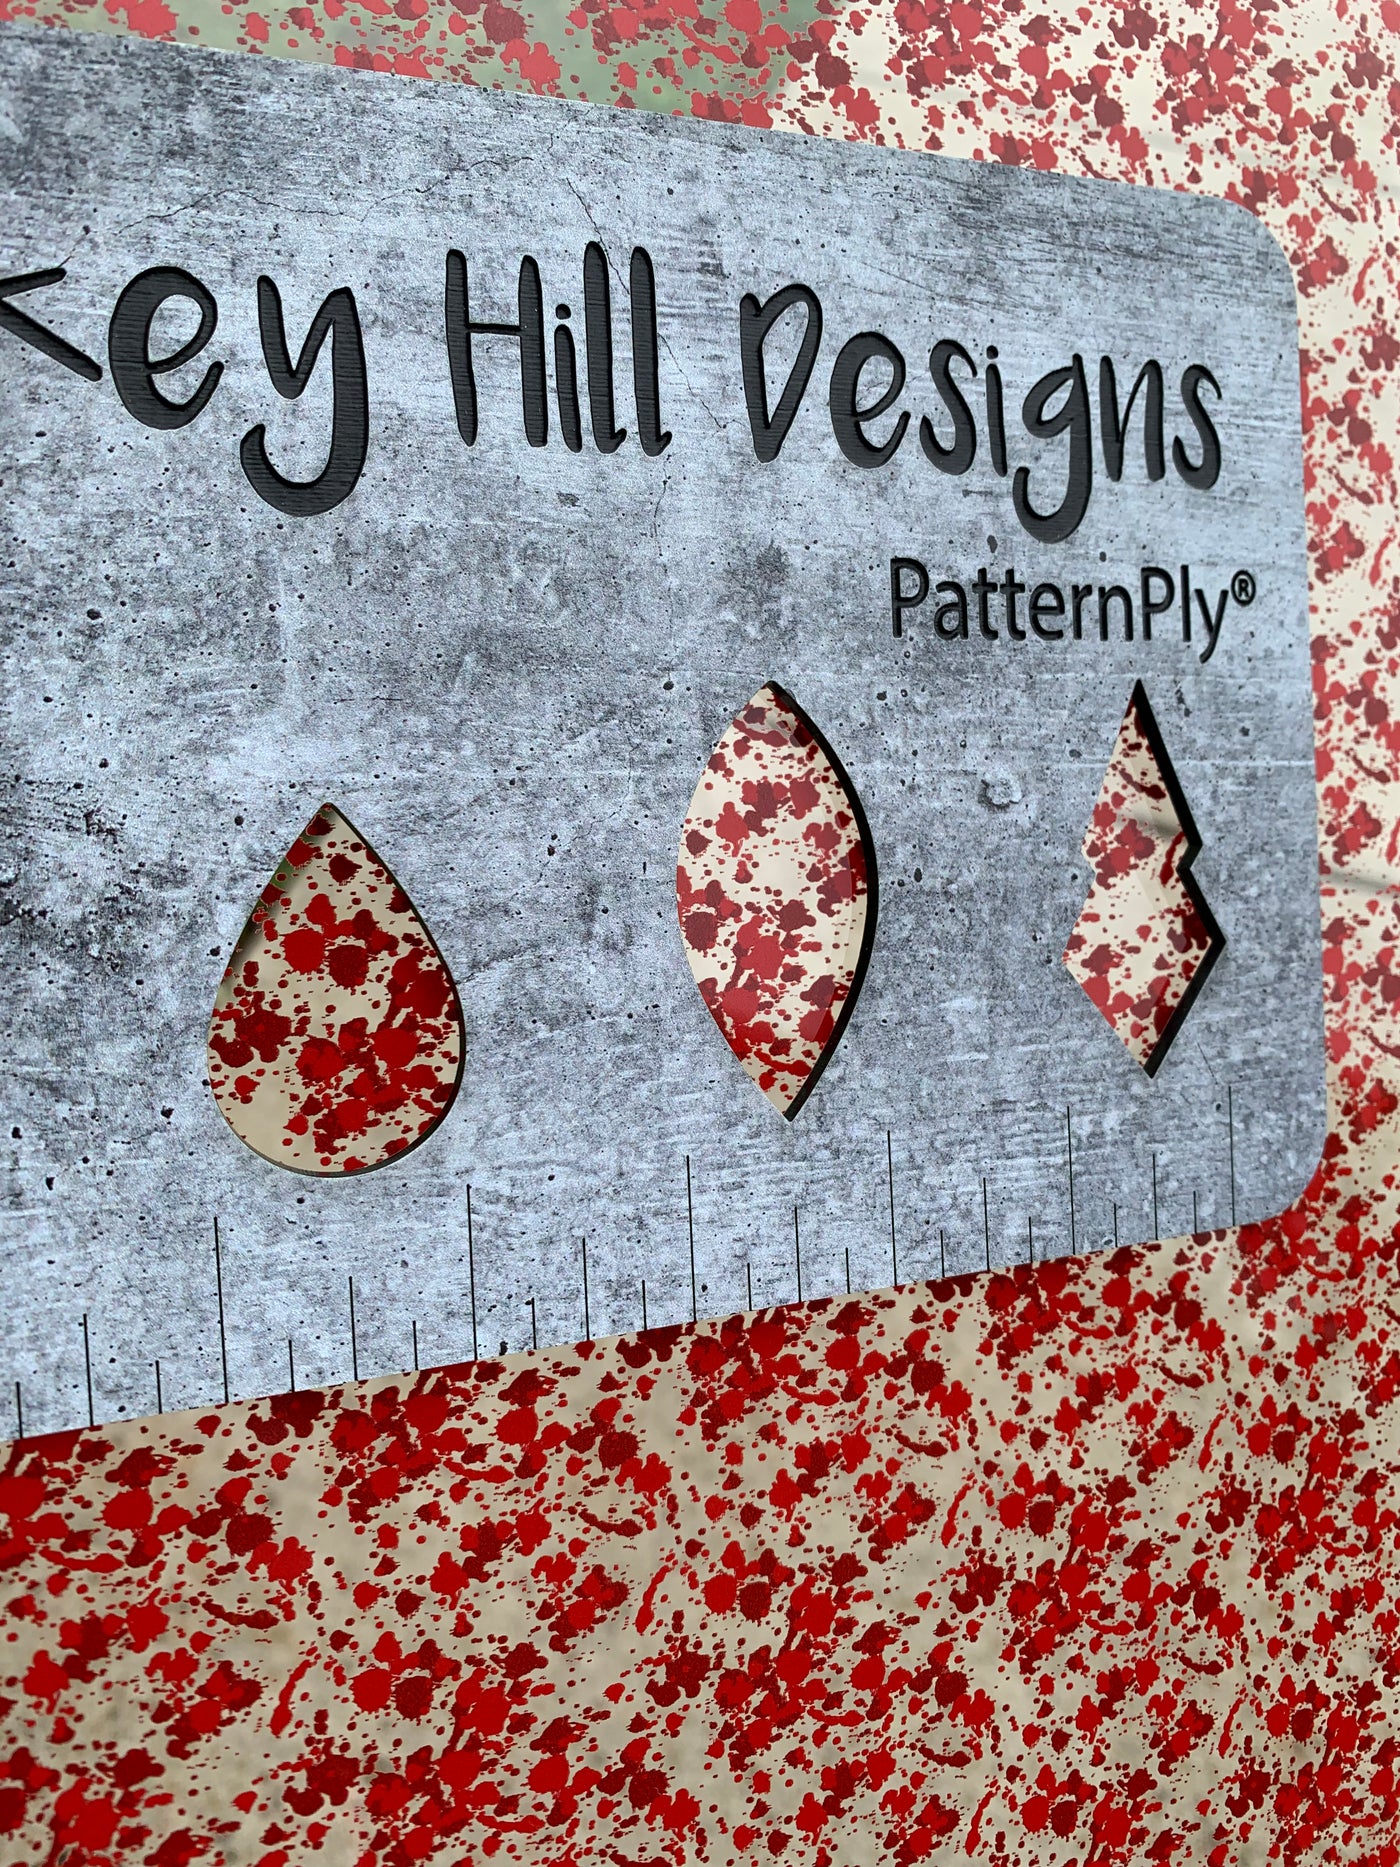 PatternPly® Scattered Micro Blood Splatter